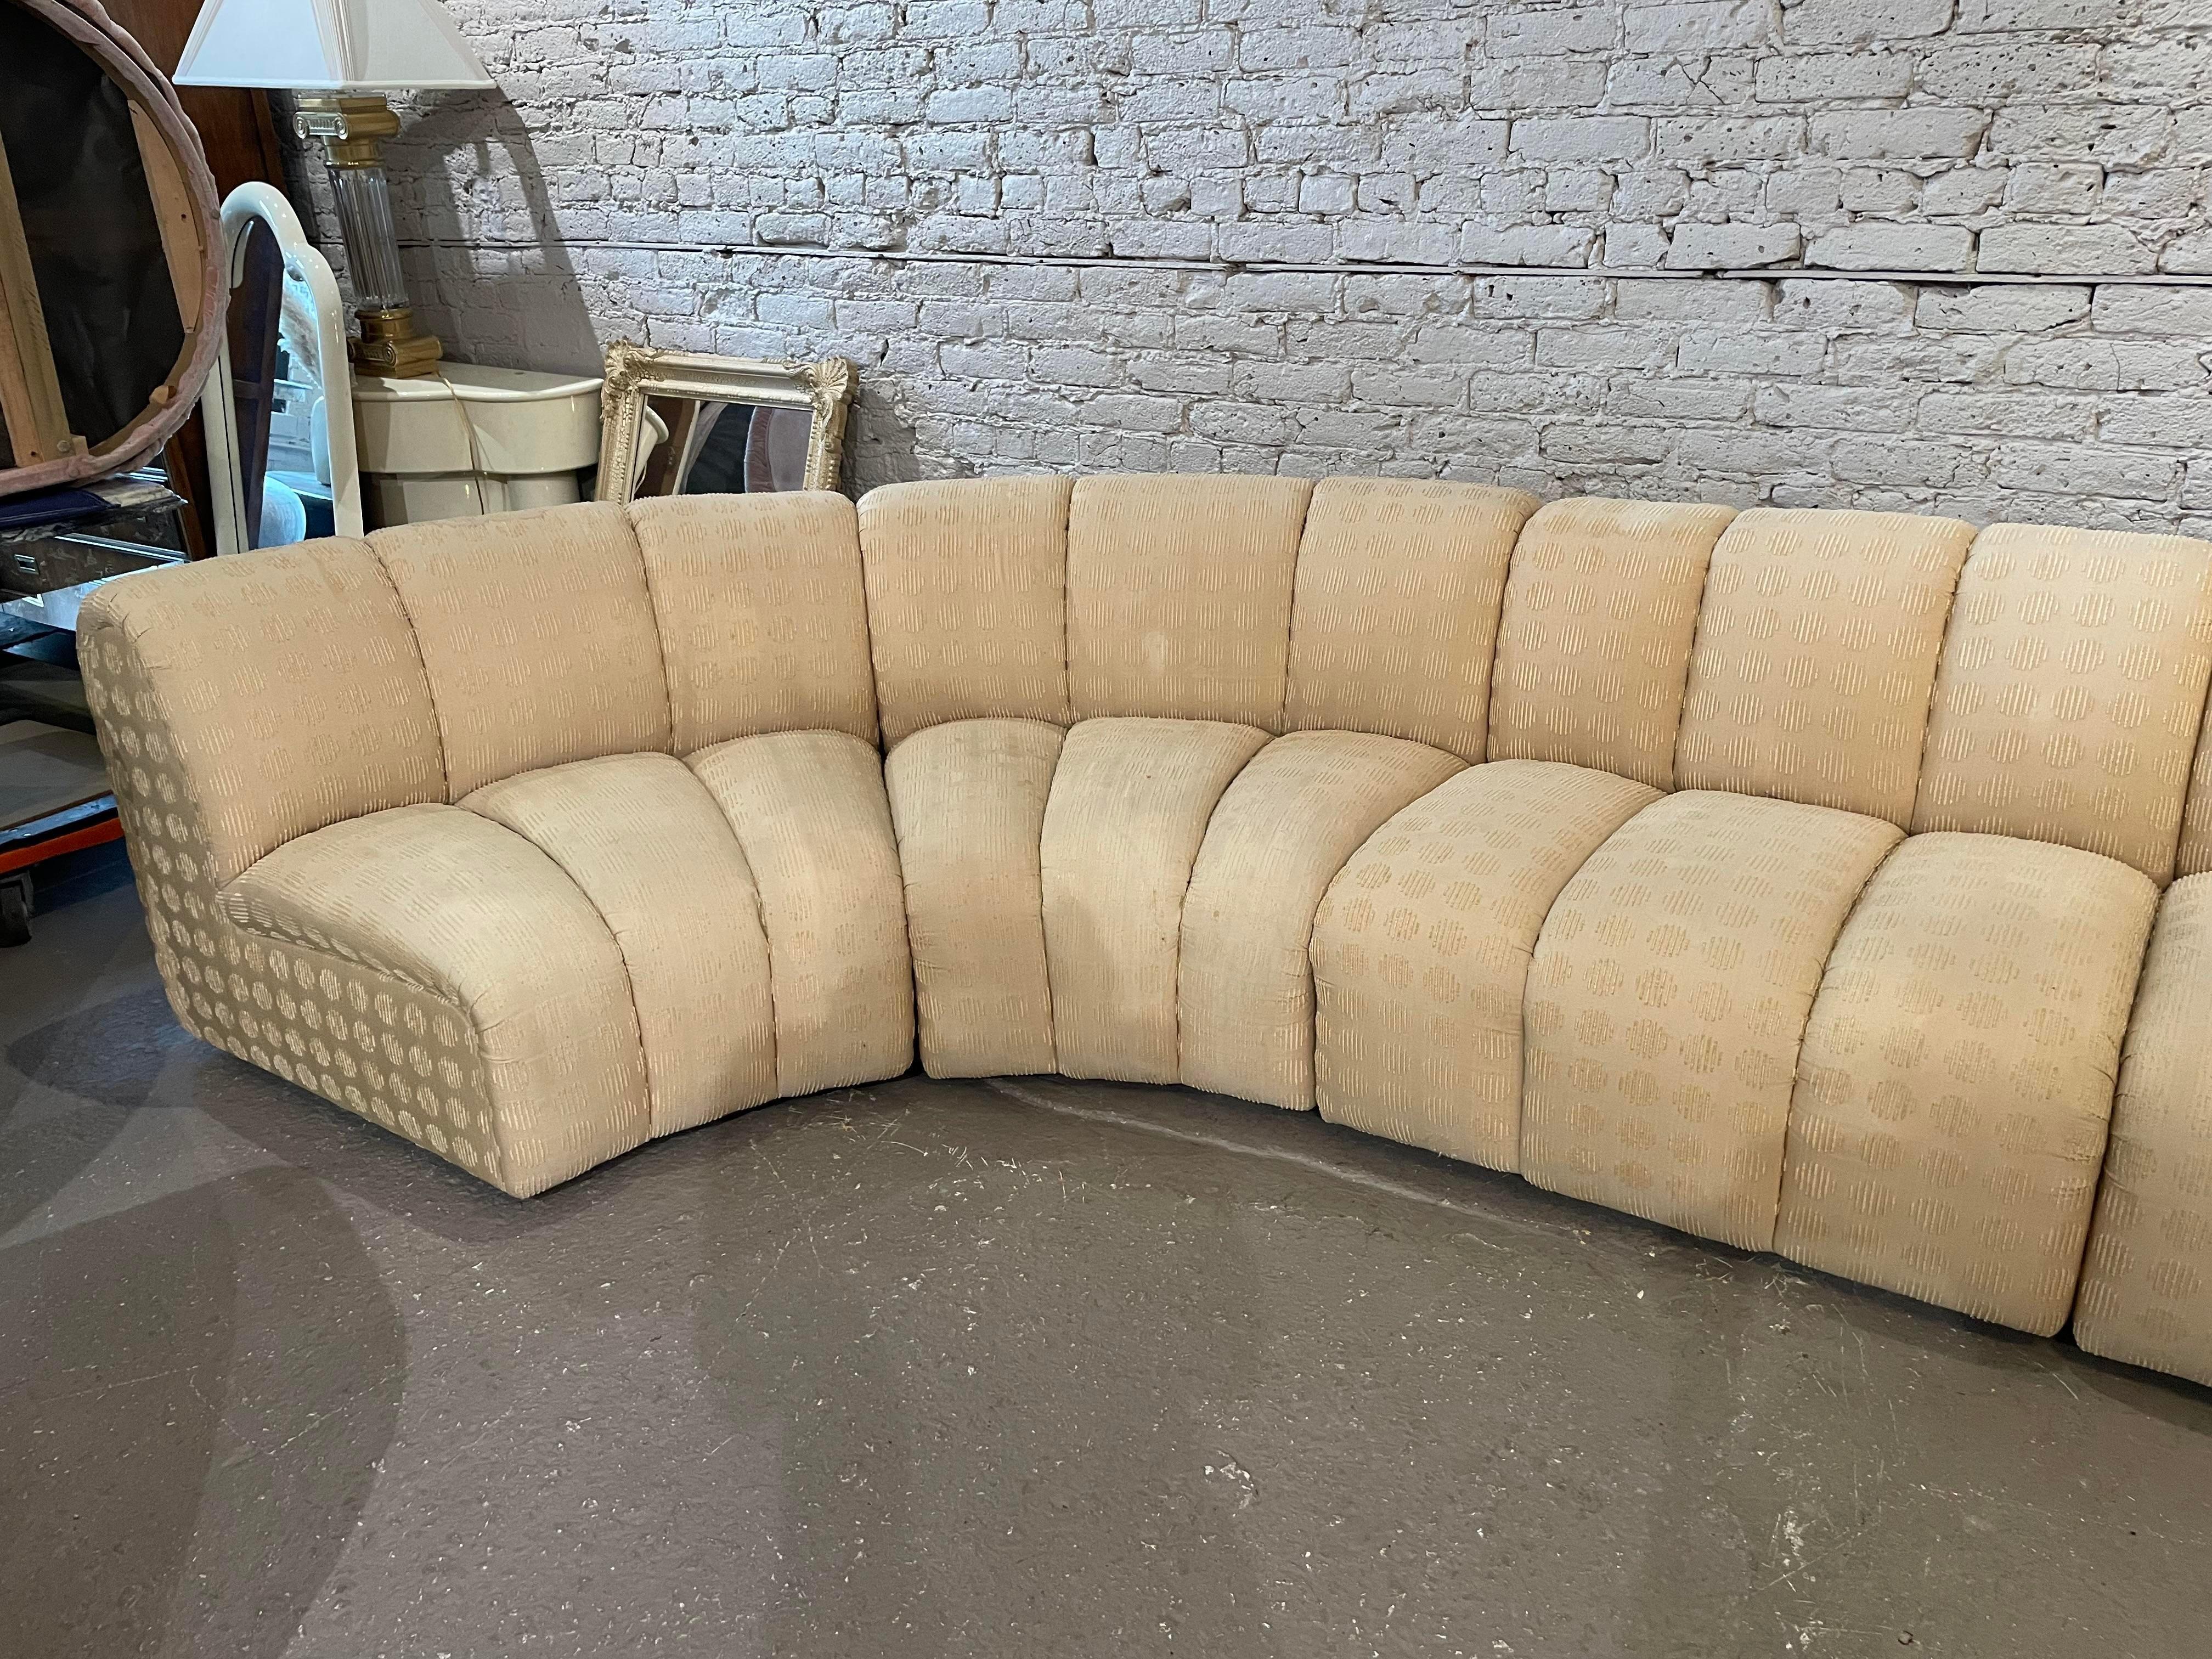 Upholstery 1980s Vintage Channeled Sectional Sofa